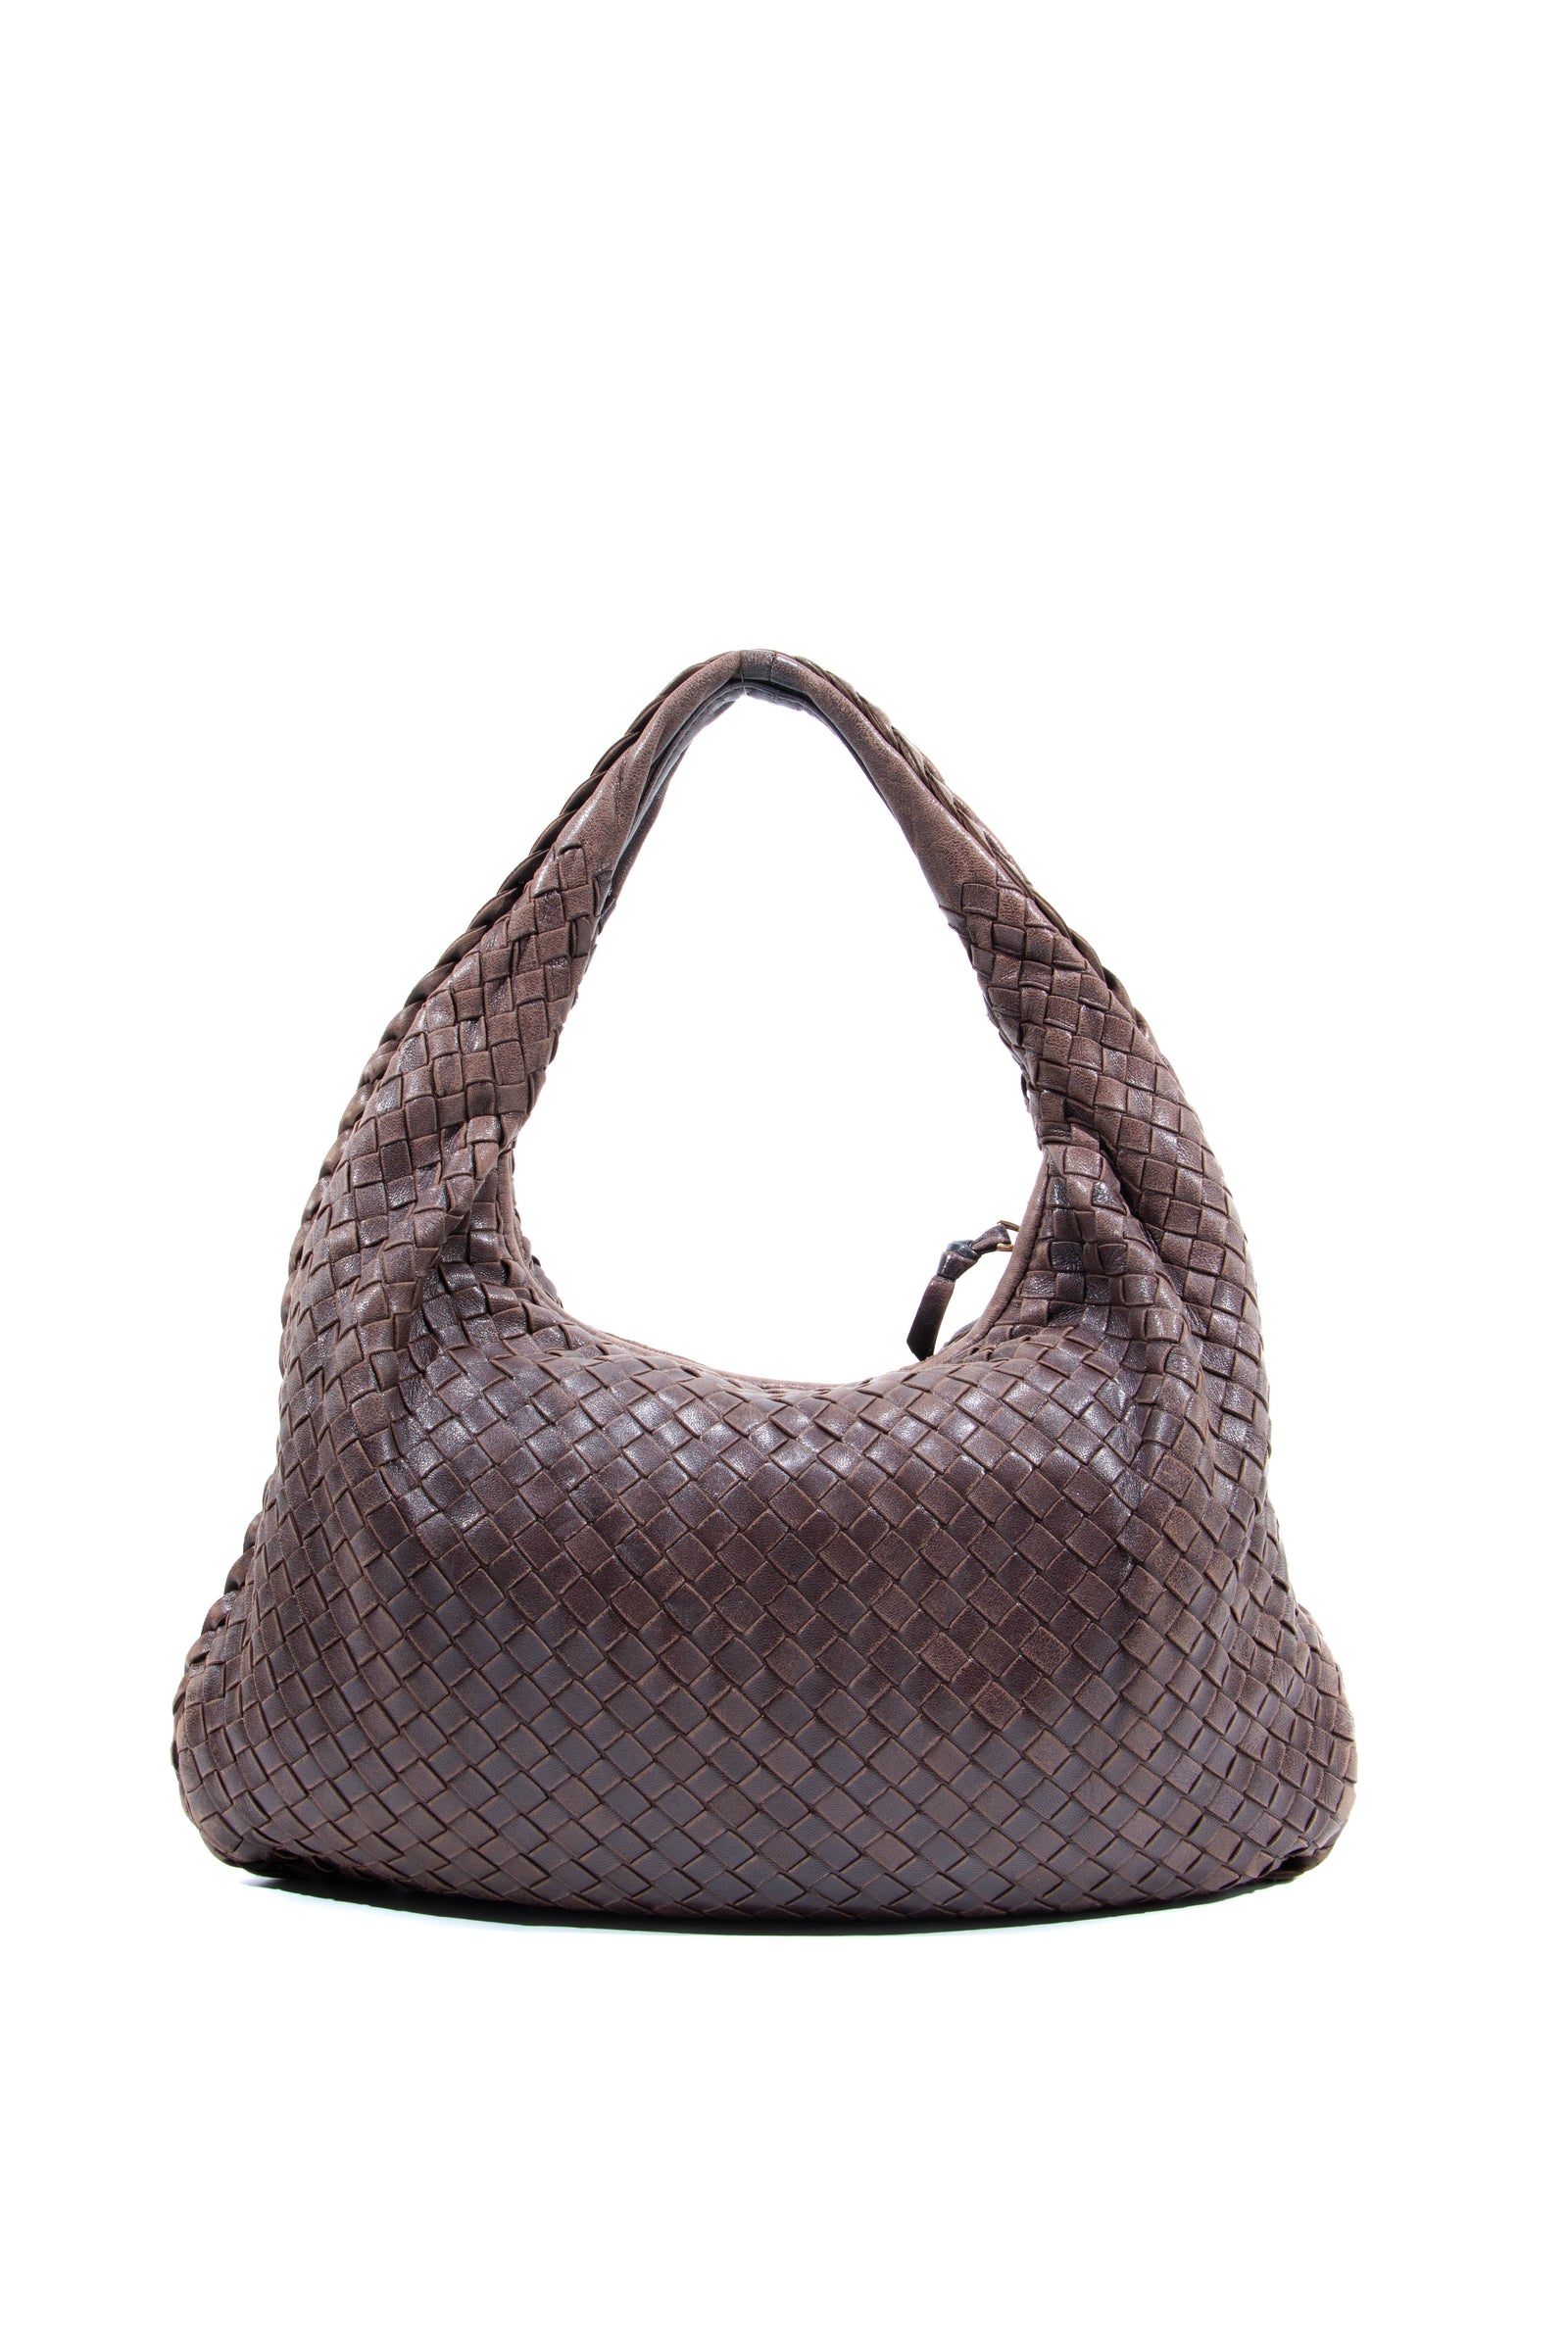 Chanel Tweed & Camel Quilted Aged Calfskin Medium Casual Style Hobo - Handbag | Pre-owned & Certified | used Second Hand | Unisex